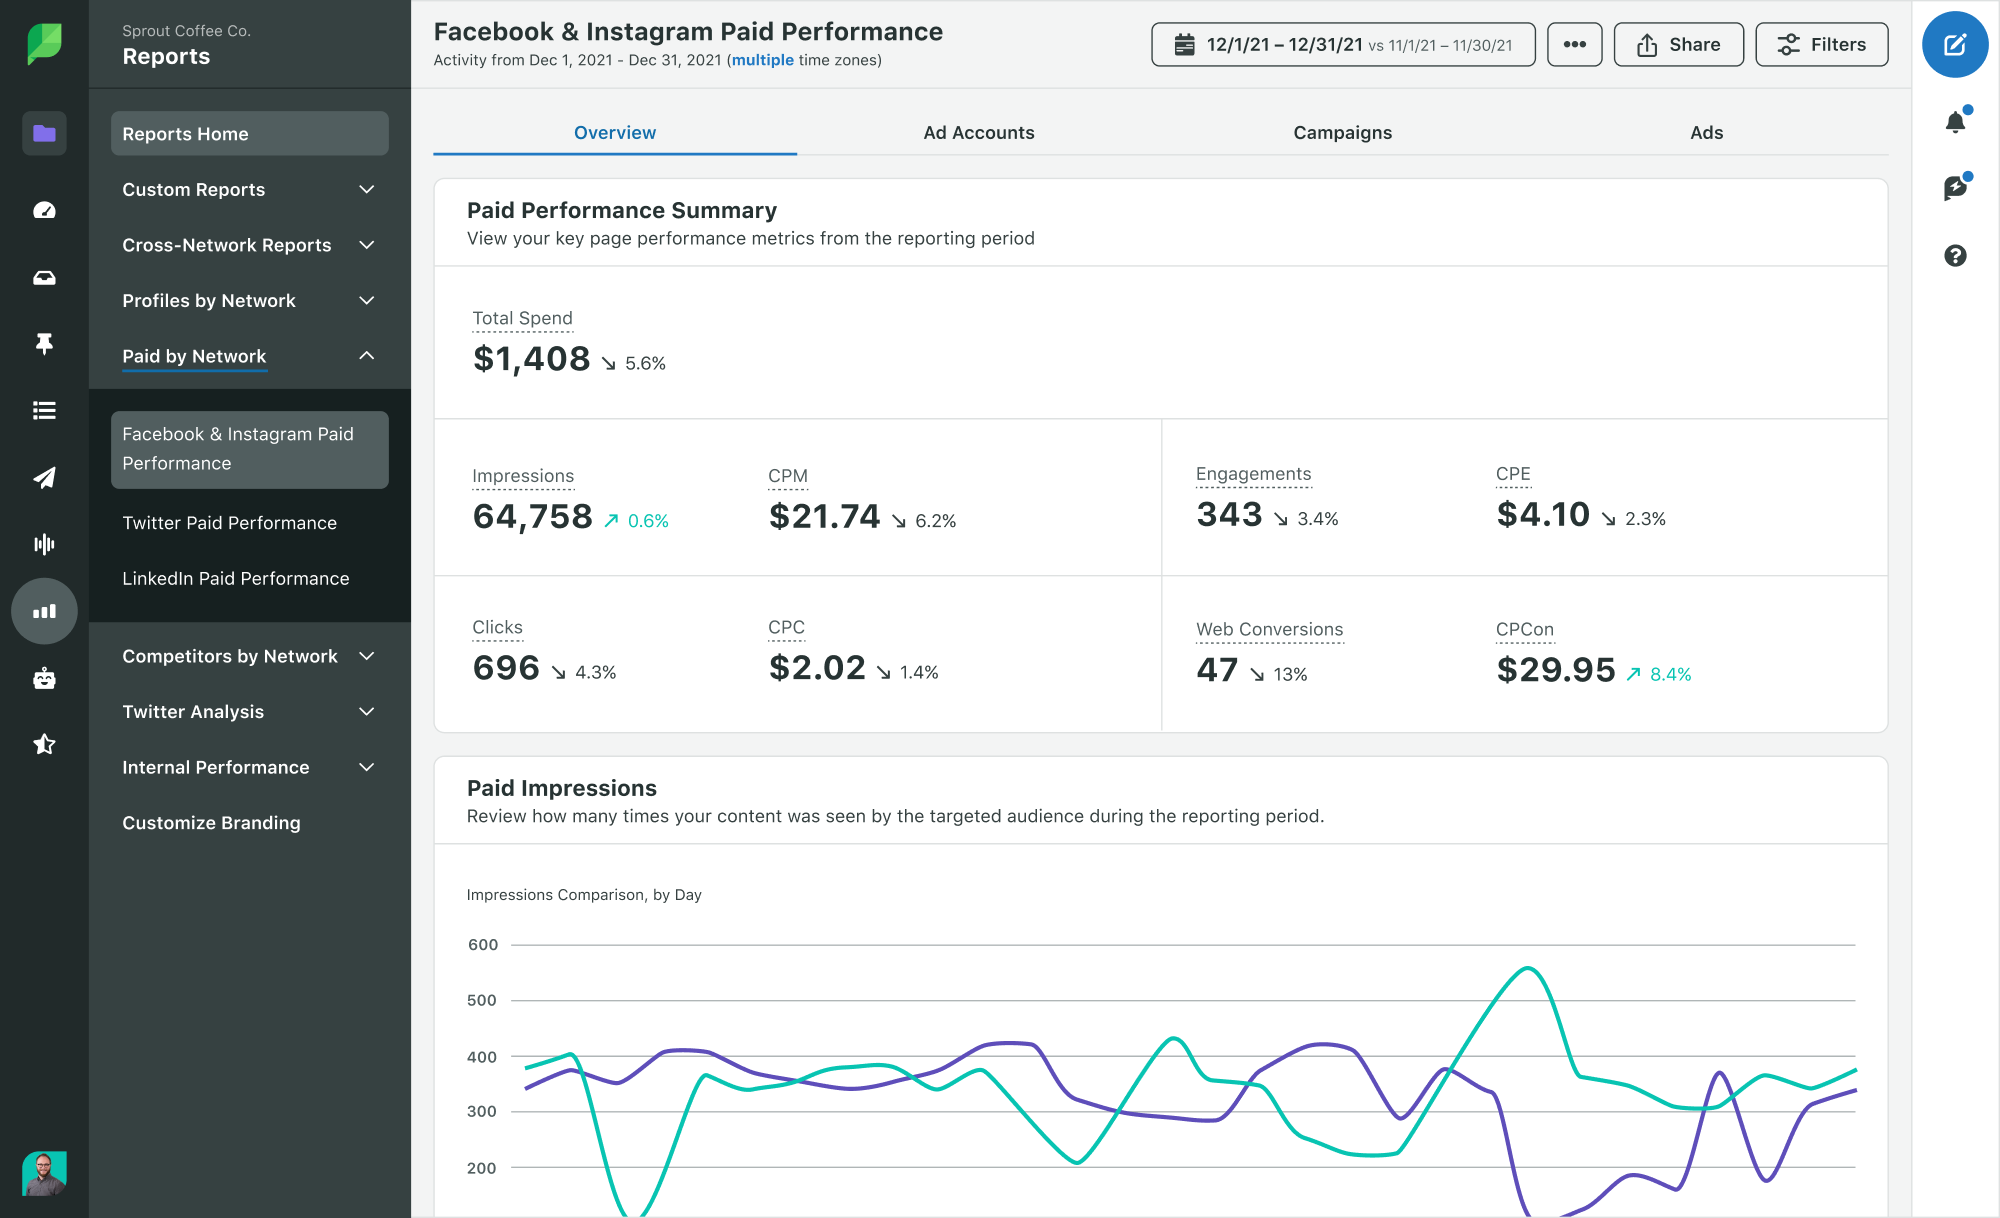 A screenshot of Sprout Social’s Facebook & Instagram Paid Performance Report. The report key metrics including total spend, impressions, CPM, clicks, CPC, engagements, CPE, web conversions and cost per conversion. 